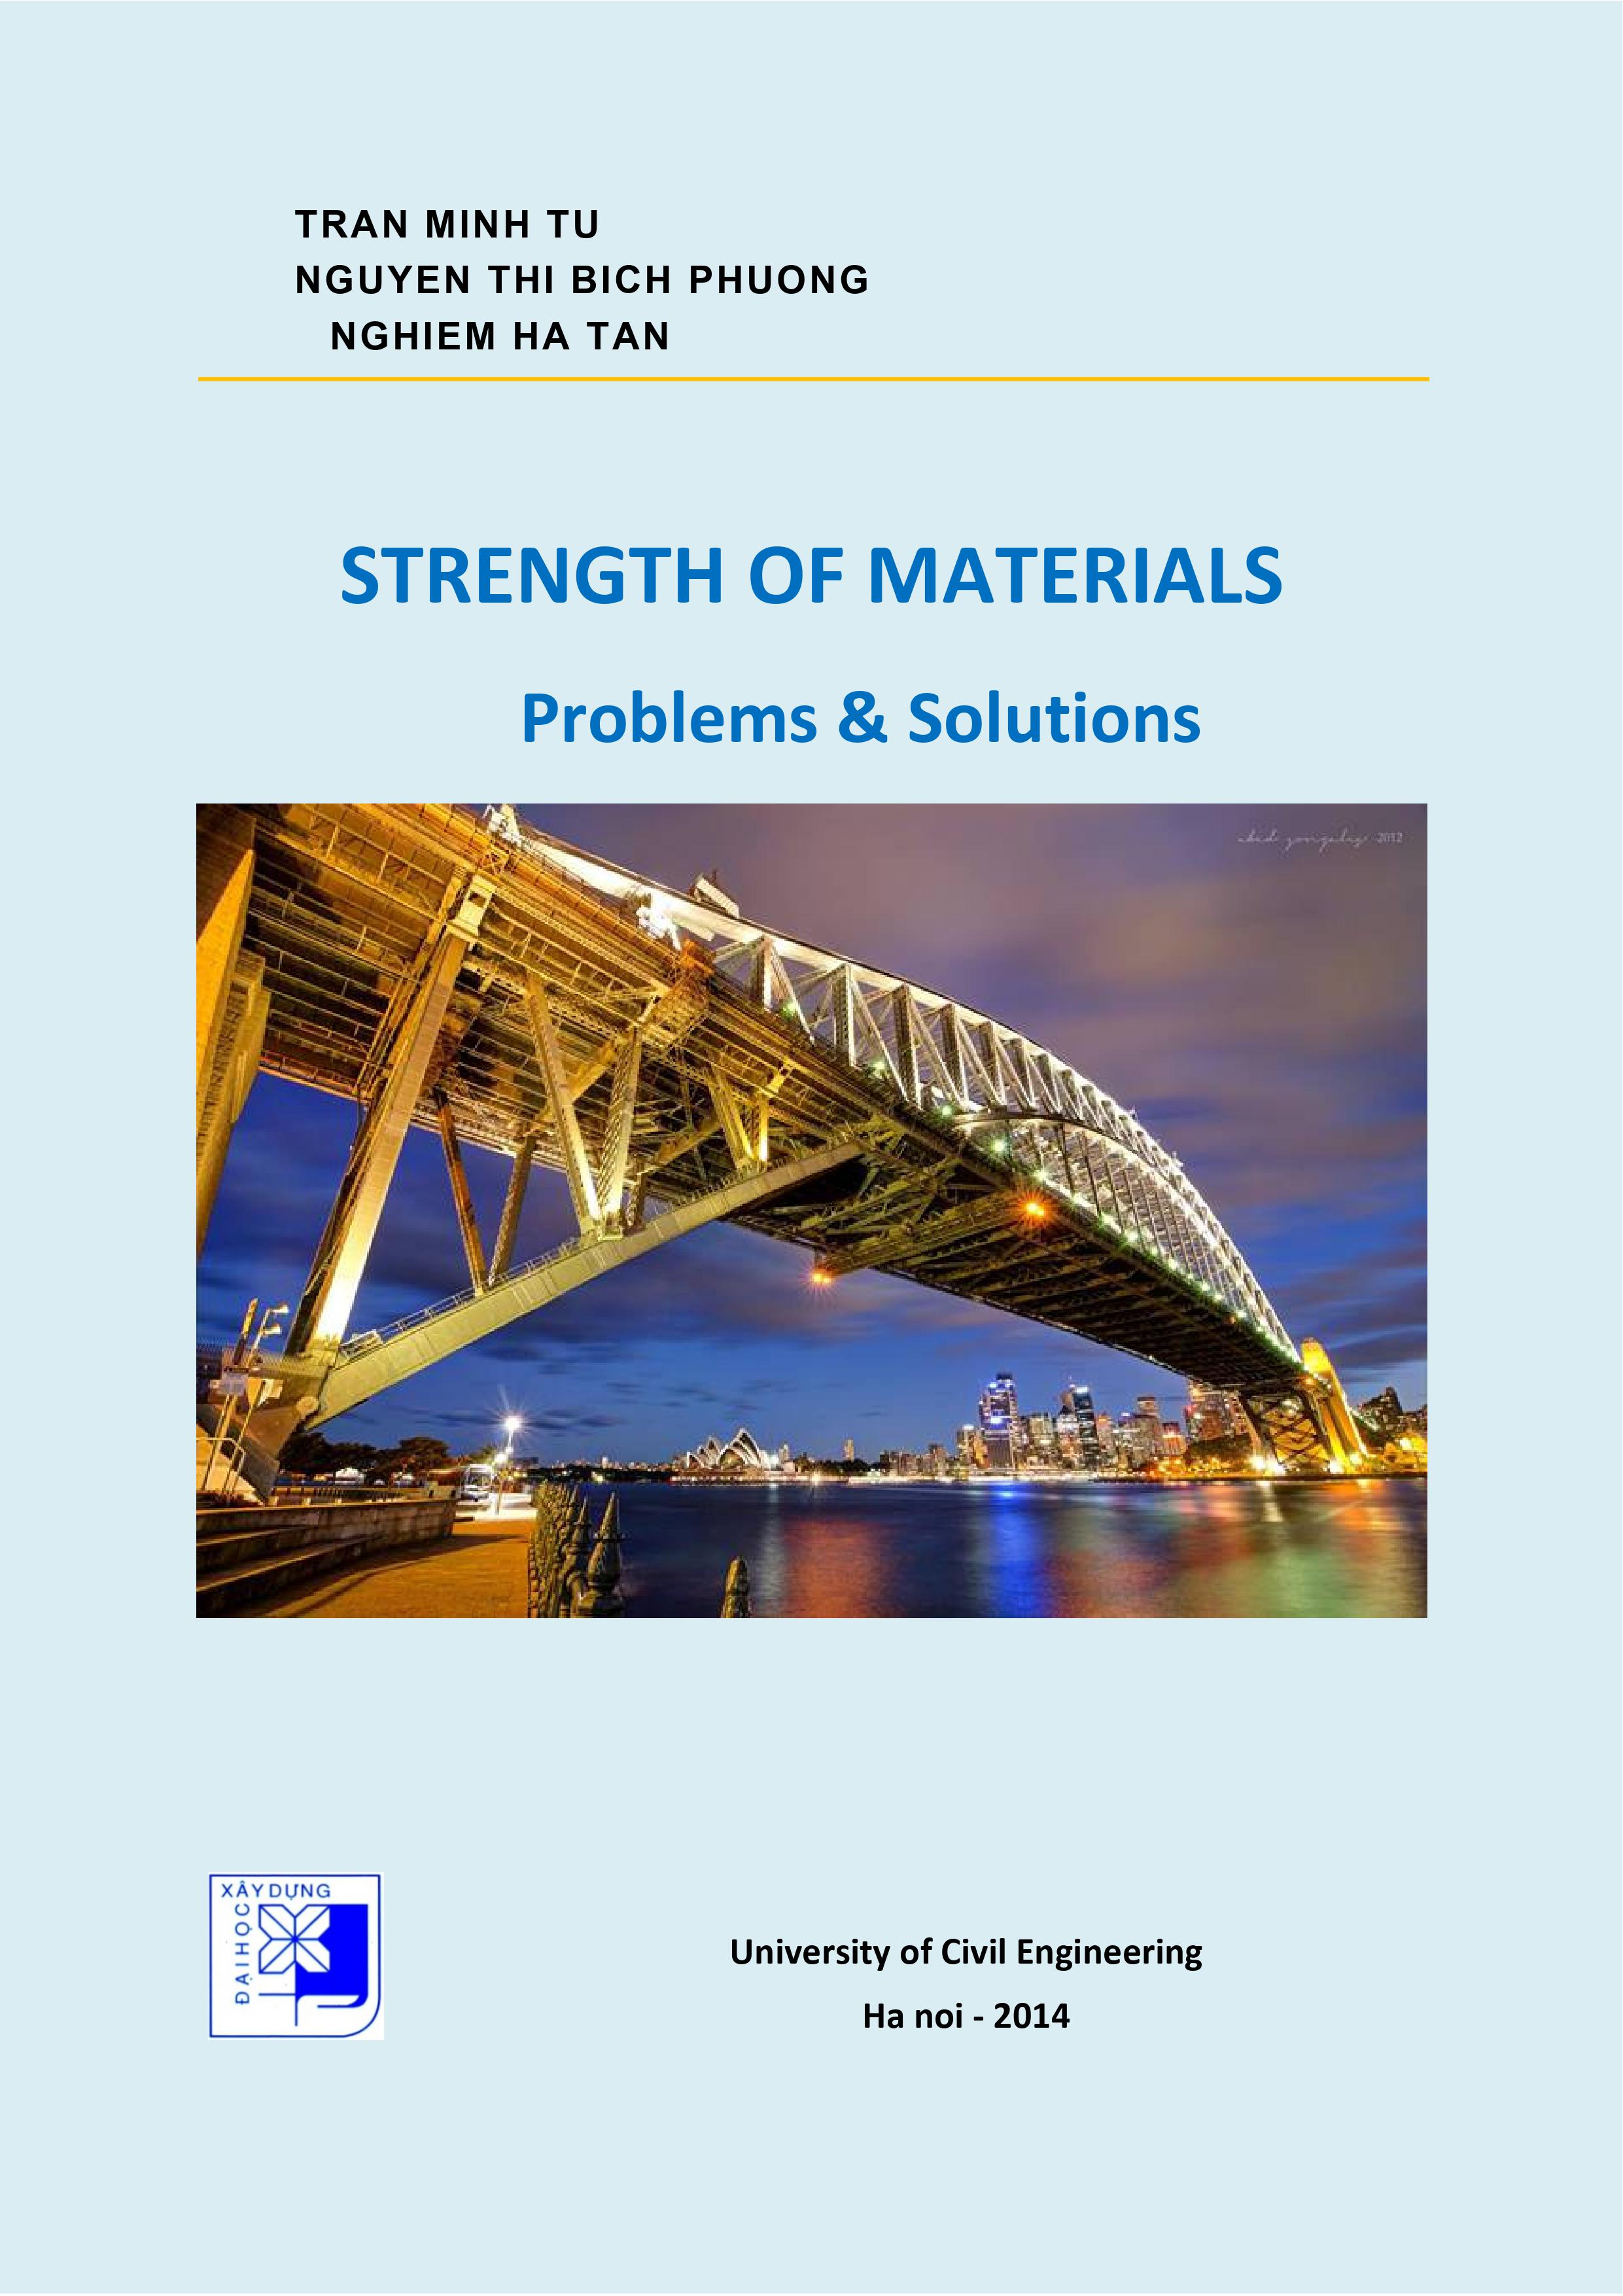 Strength of Materials Problems & Solution